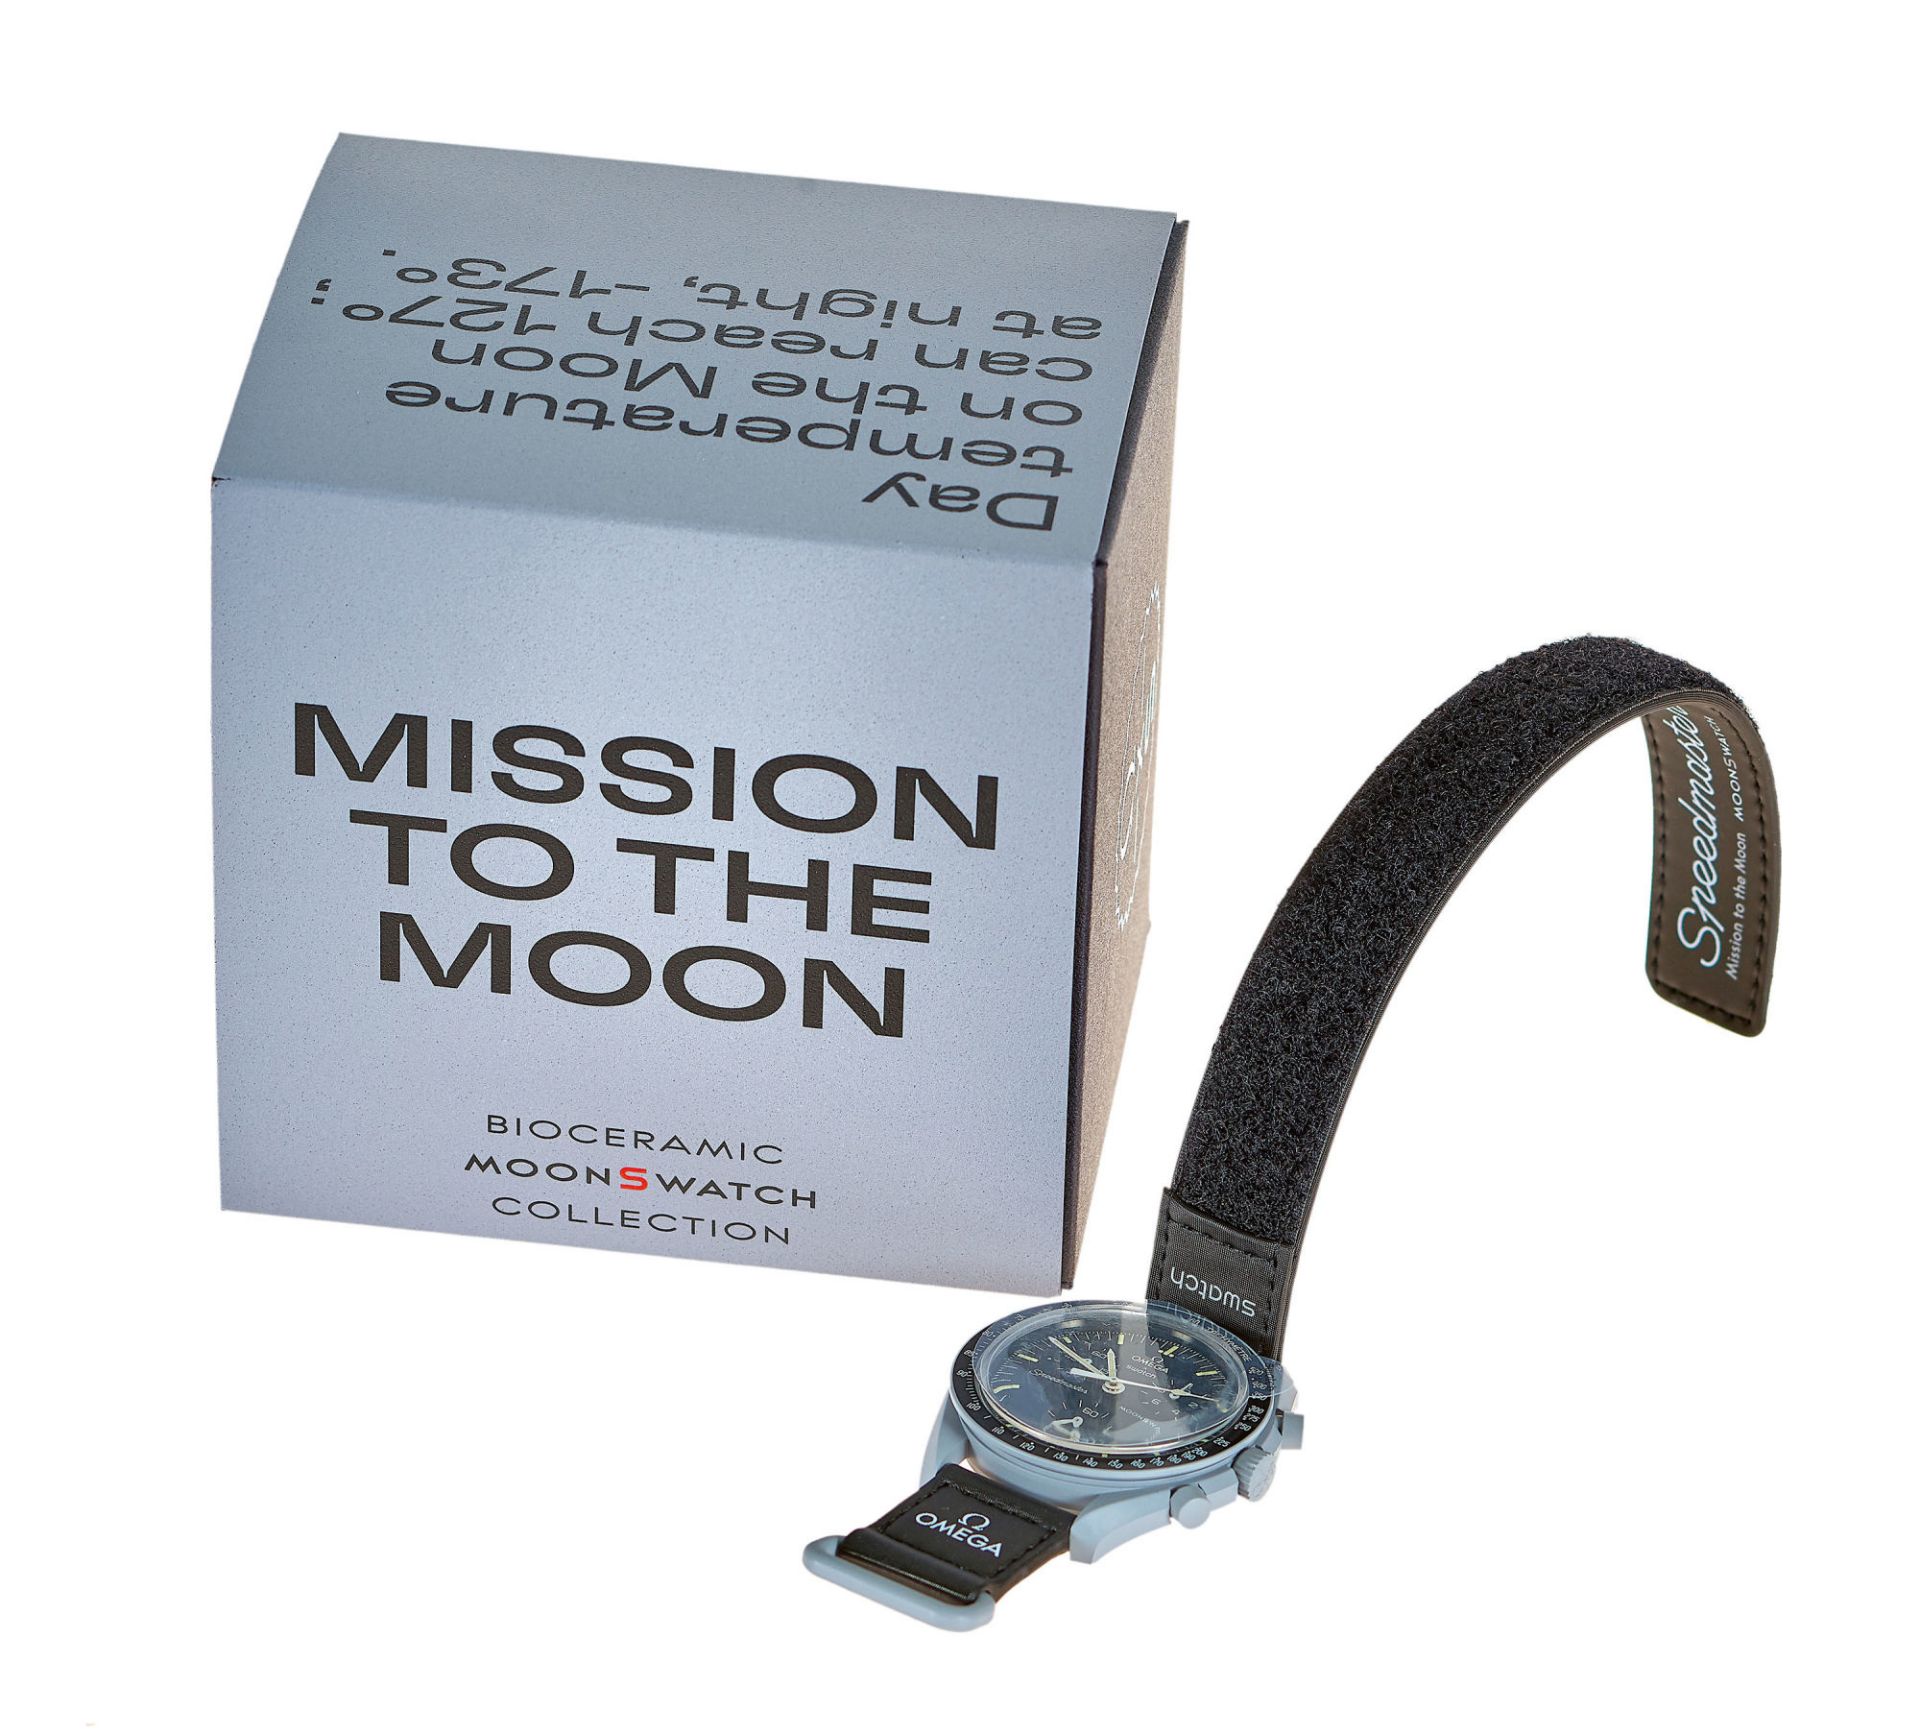 SWATCH: Armbanduhr "Mission to the Moon", MoonSwatch Collection. / Swatch, Wristwatch Mission to  .. - Bild 2 aus 2